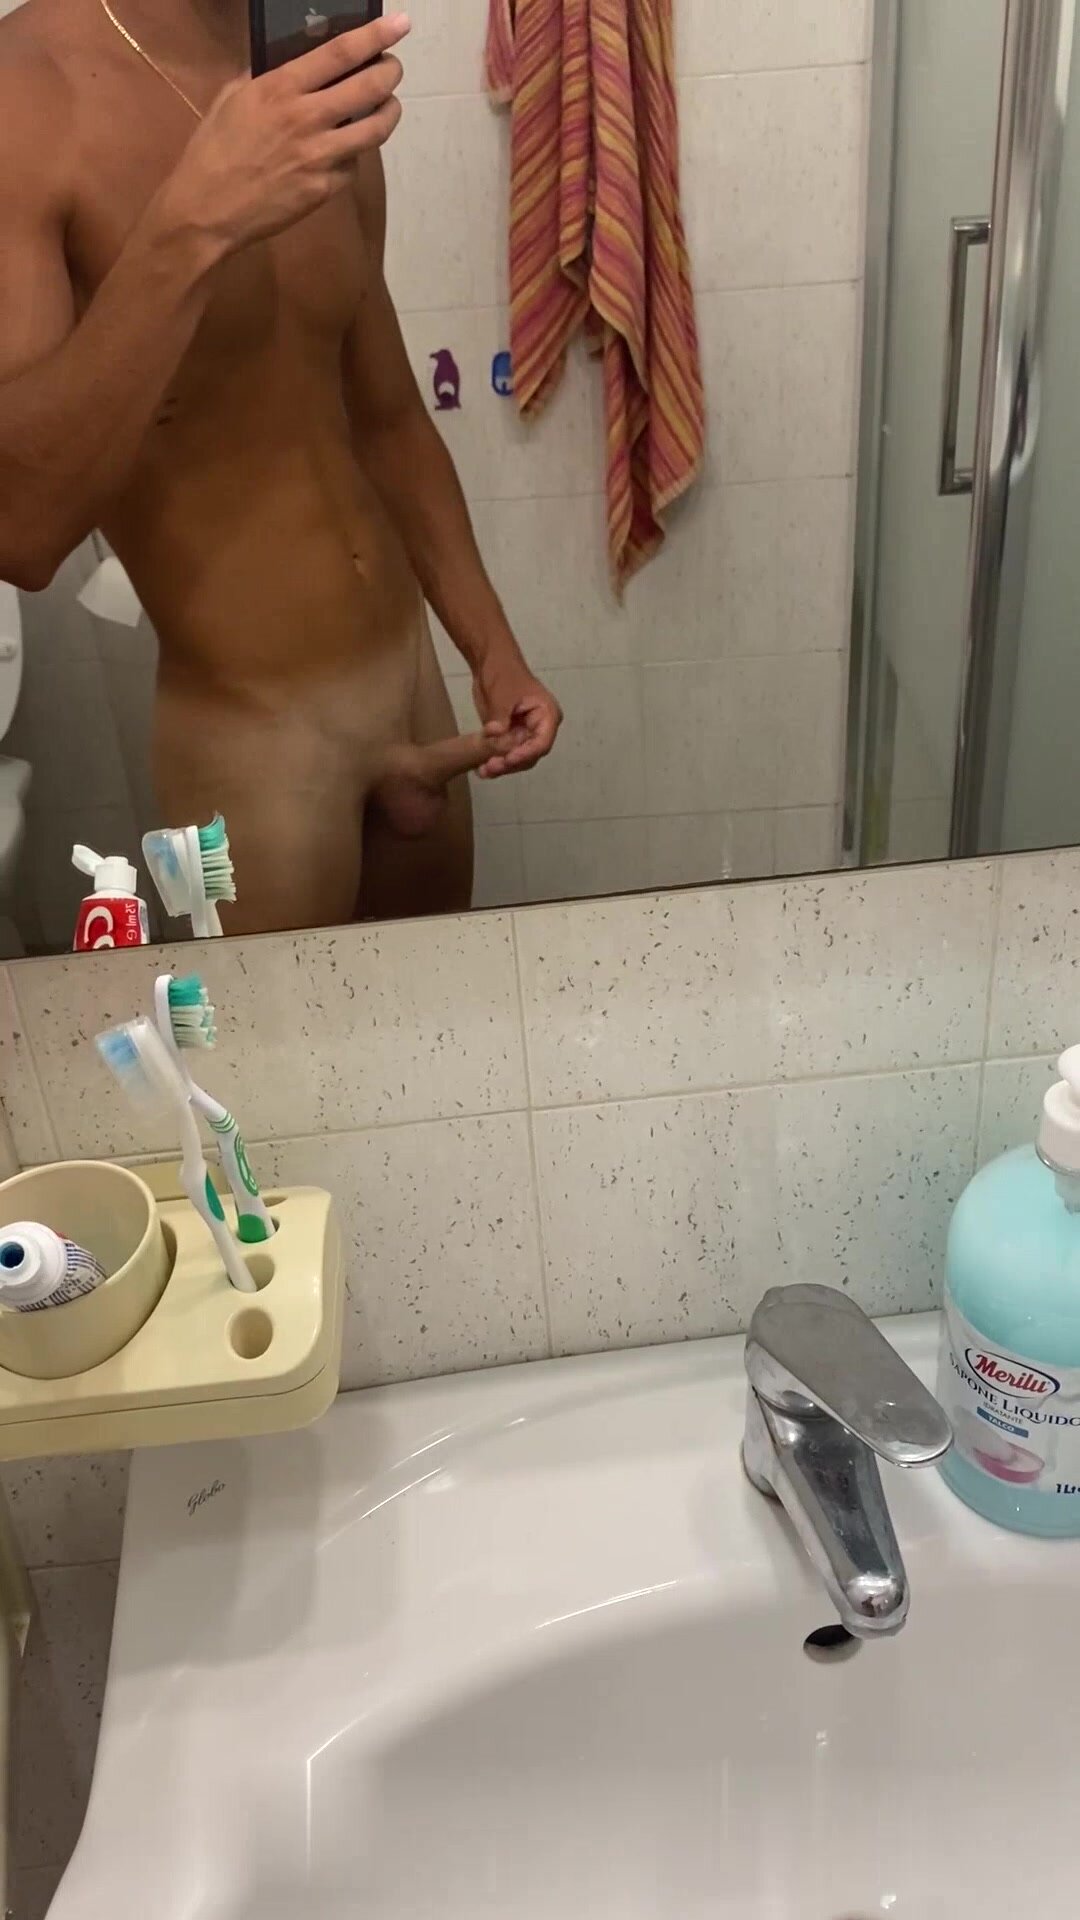 naked twink in the mirror